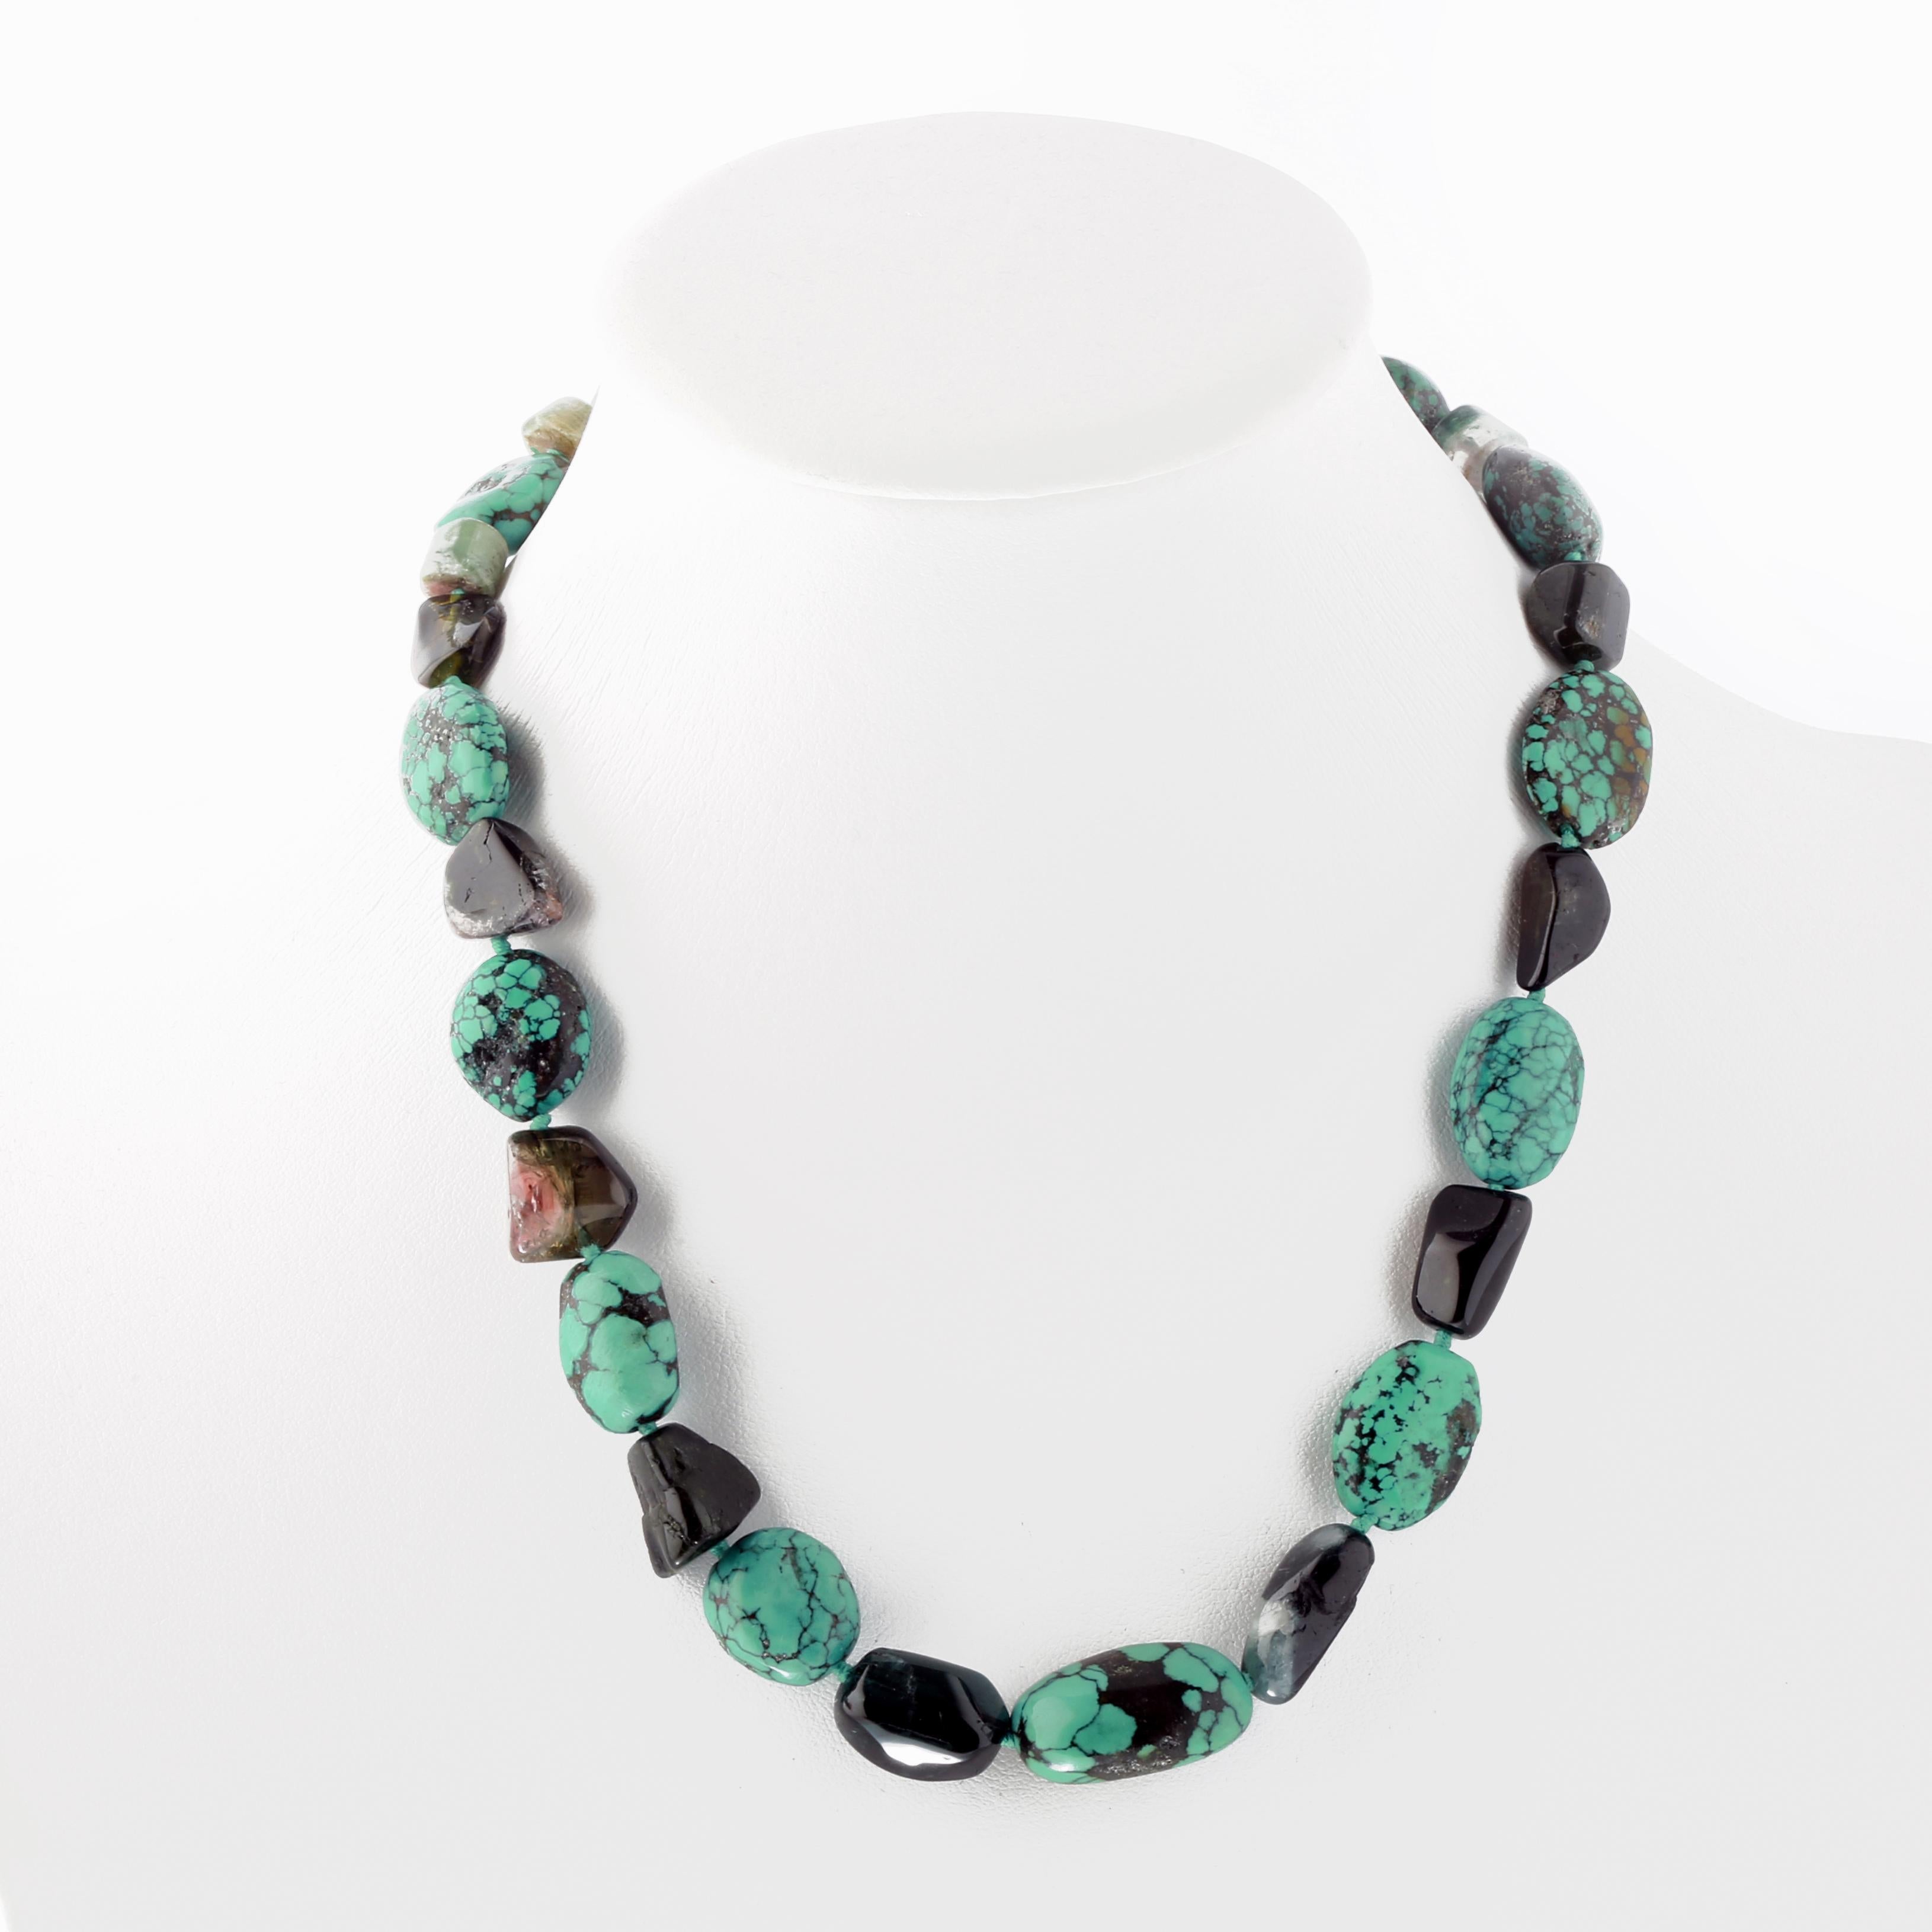 Precious necklace with Natural Turquoise and Tourmaline stones. Abstract jewellery 925 sterling silver piece inspired by the beauty of the diversity, asymmetry and color. Stunning masterpiece with a range of diverse gems and hues that rise into a